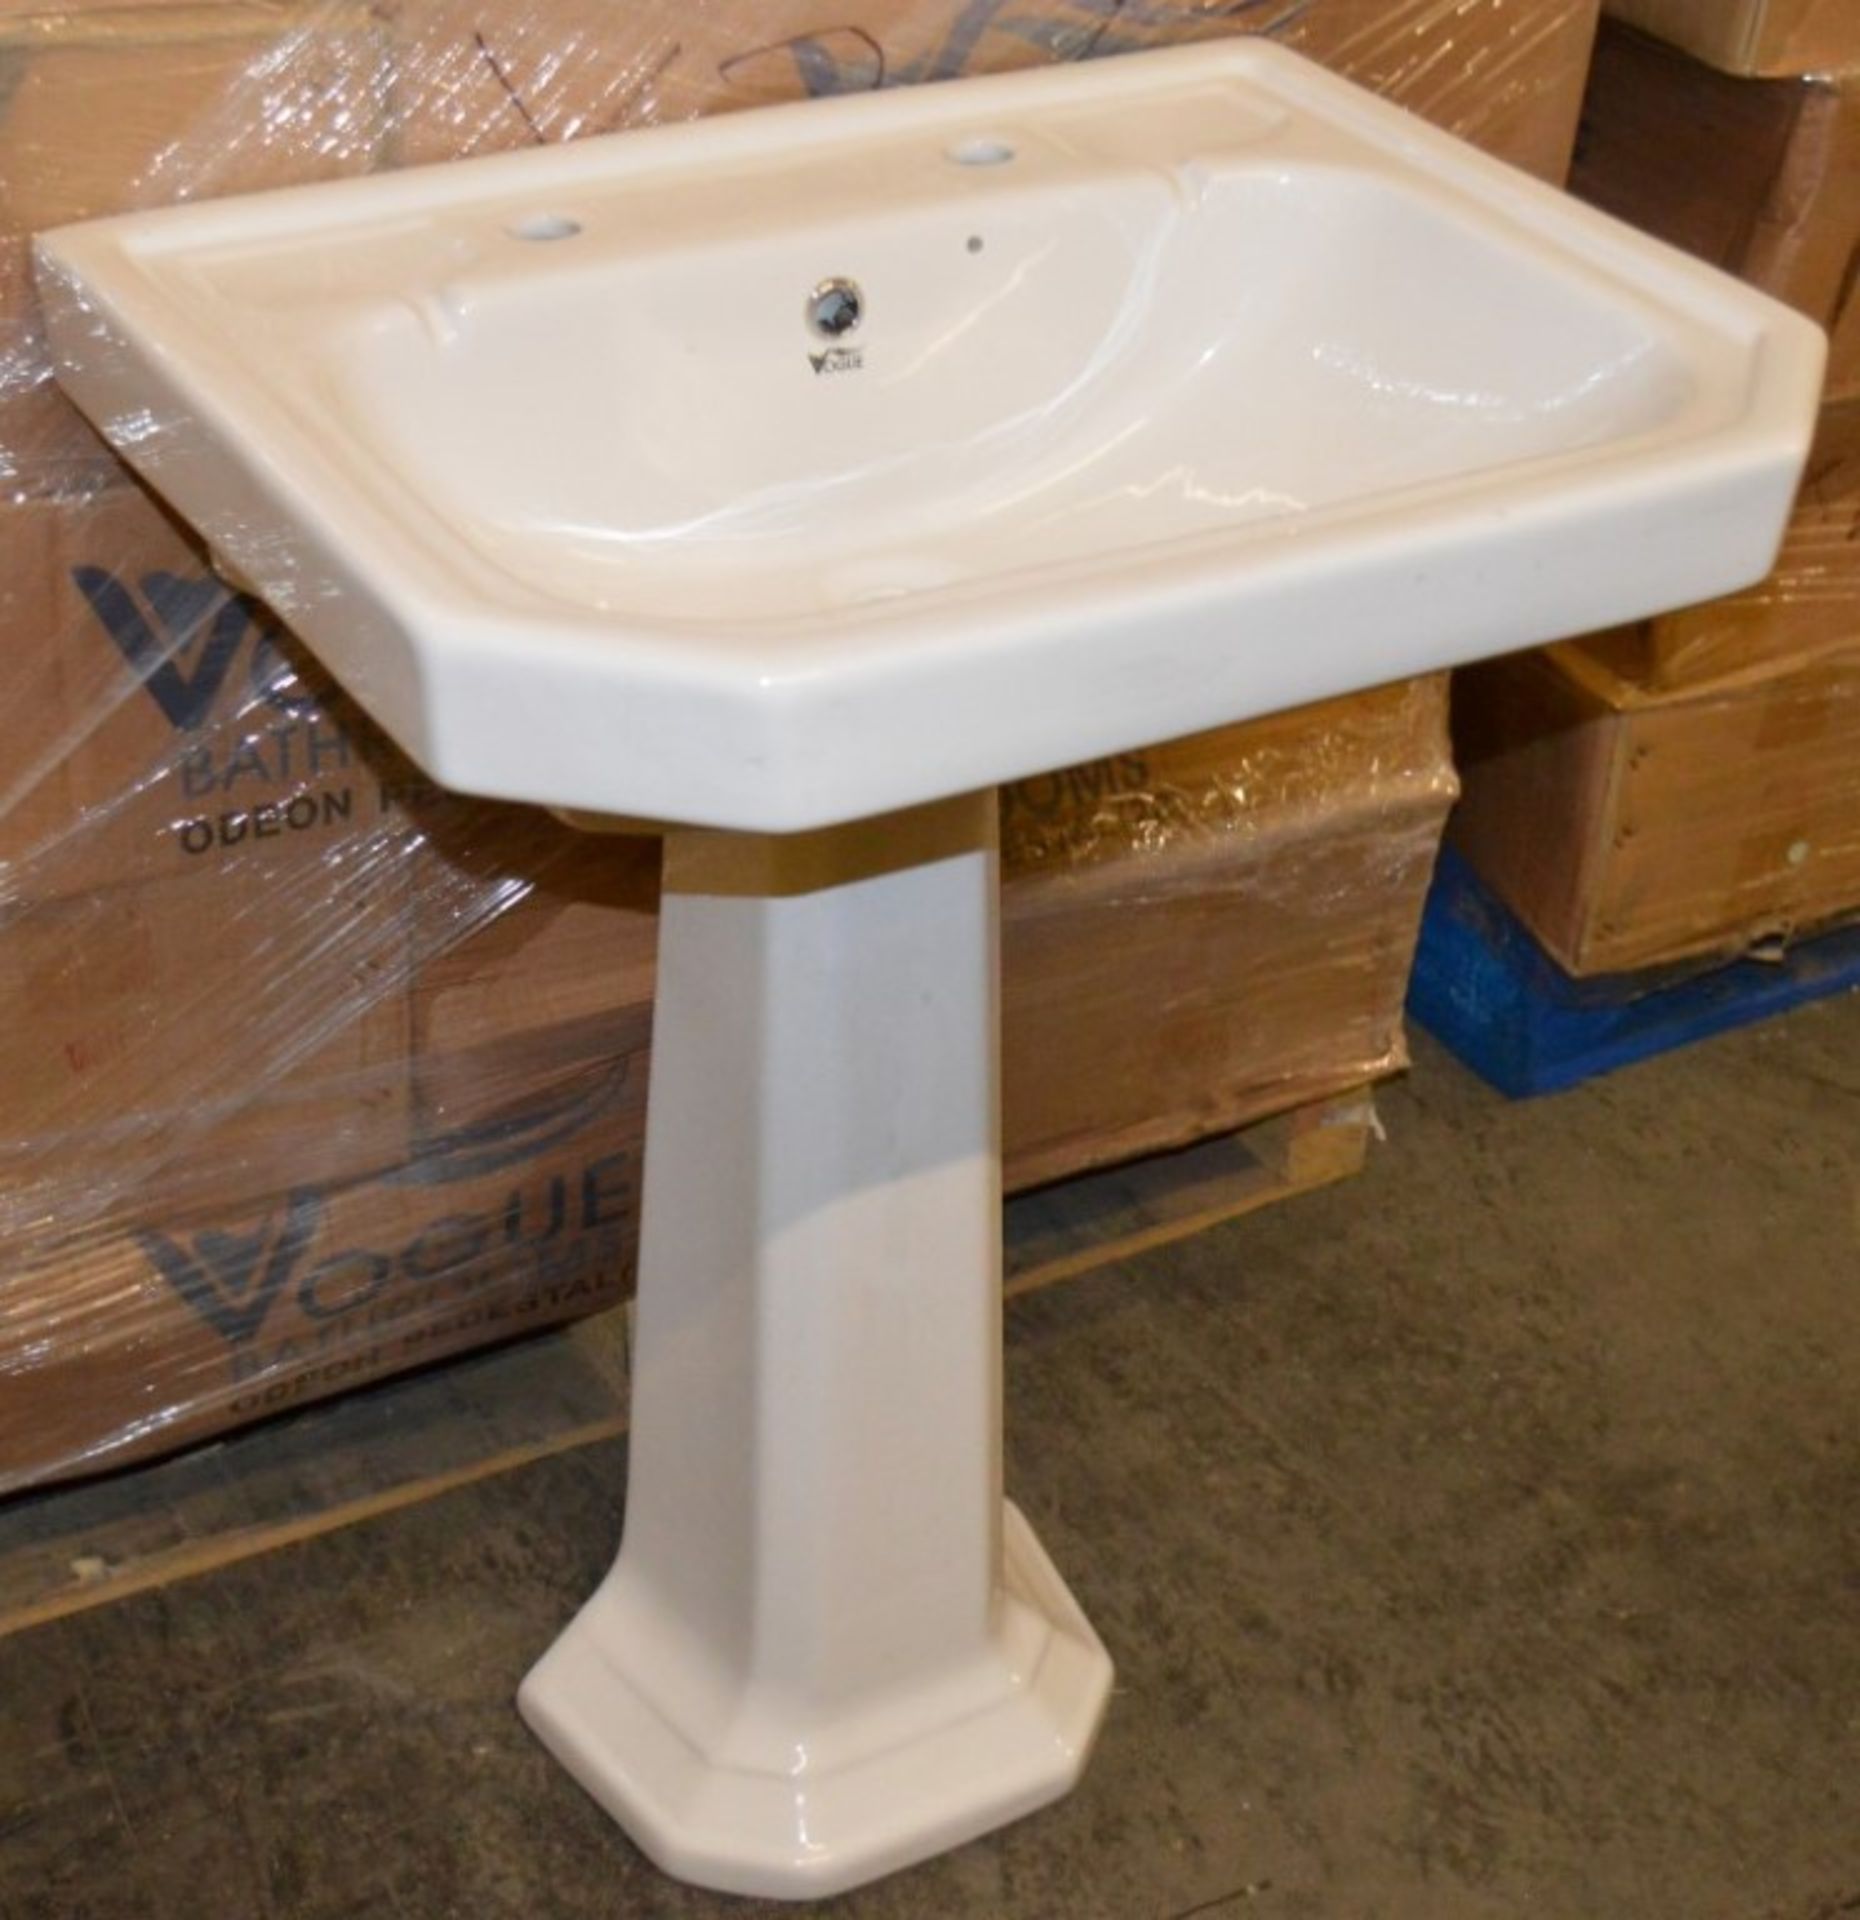 1 x Vogue Bathrooms ODEON Two Tap Hole SINK BASIN With Pedestal - 600mm Width - Brand New Boxed - Image 2 of 3